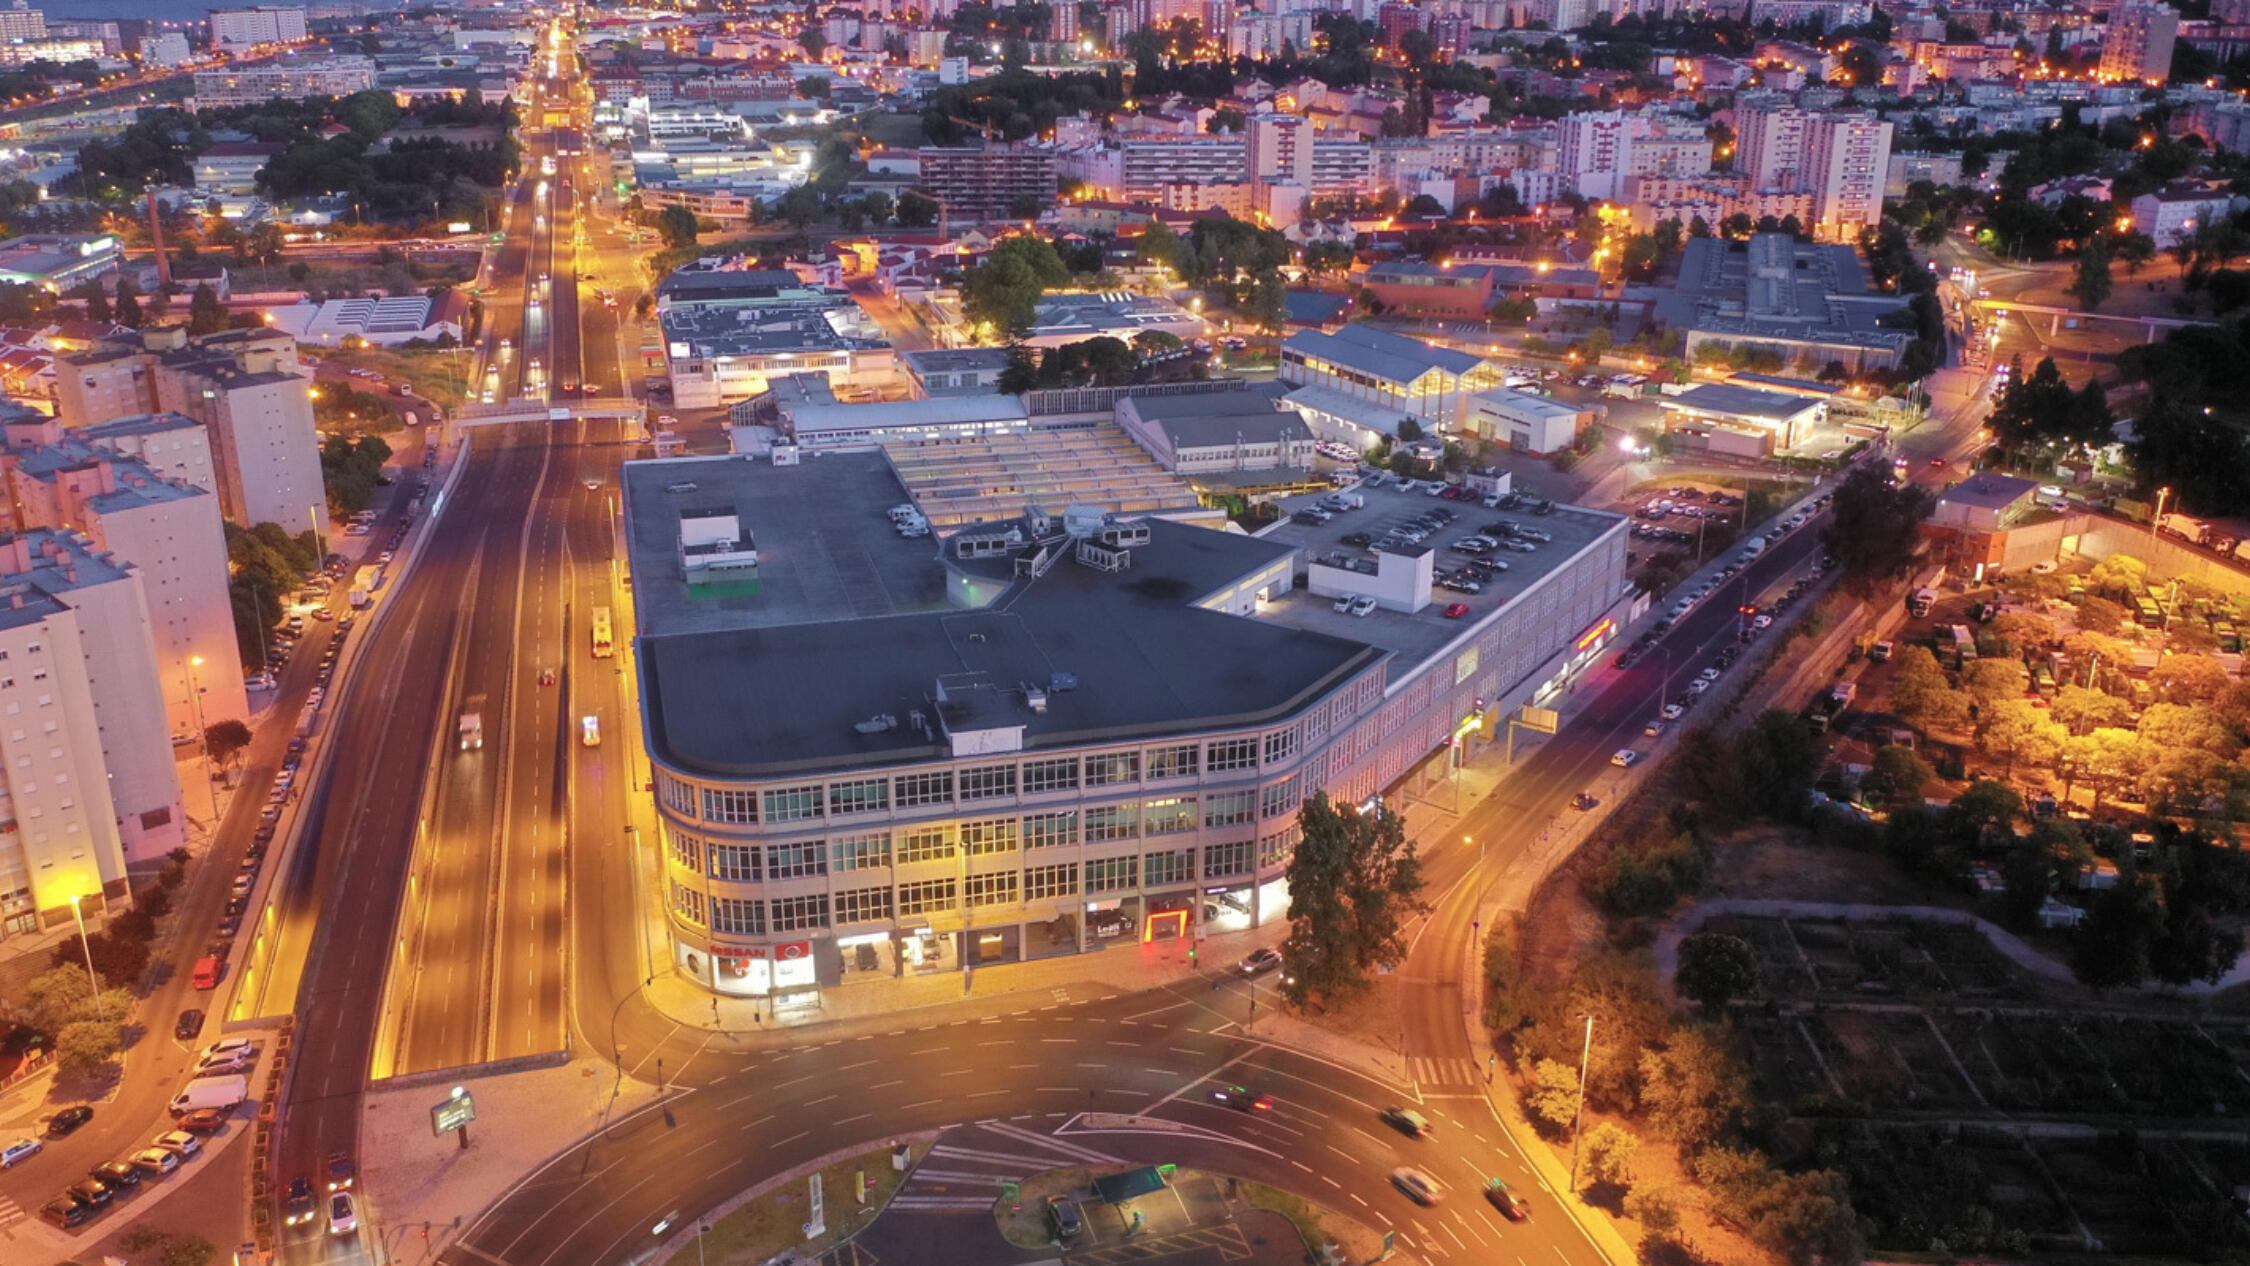 Aerial view of The Innovation & Design Building Lisbon at night